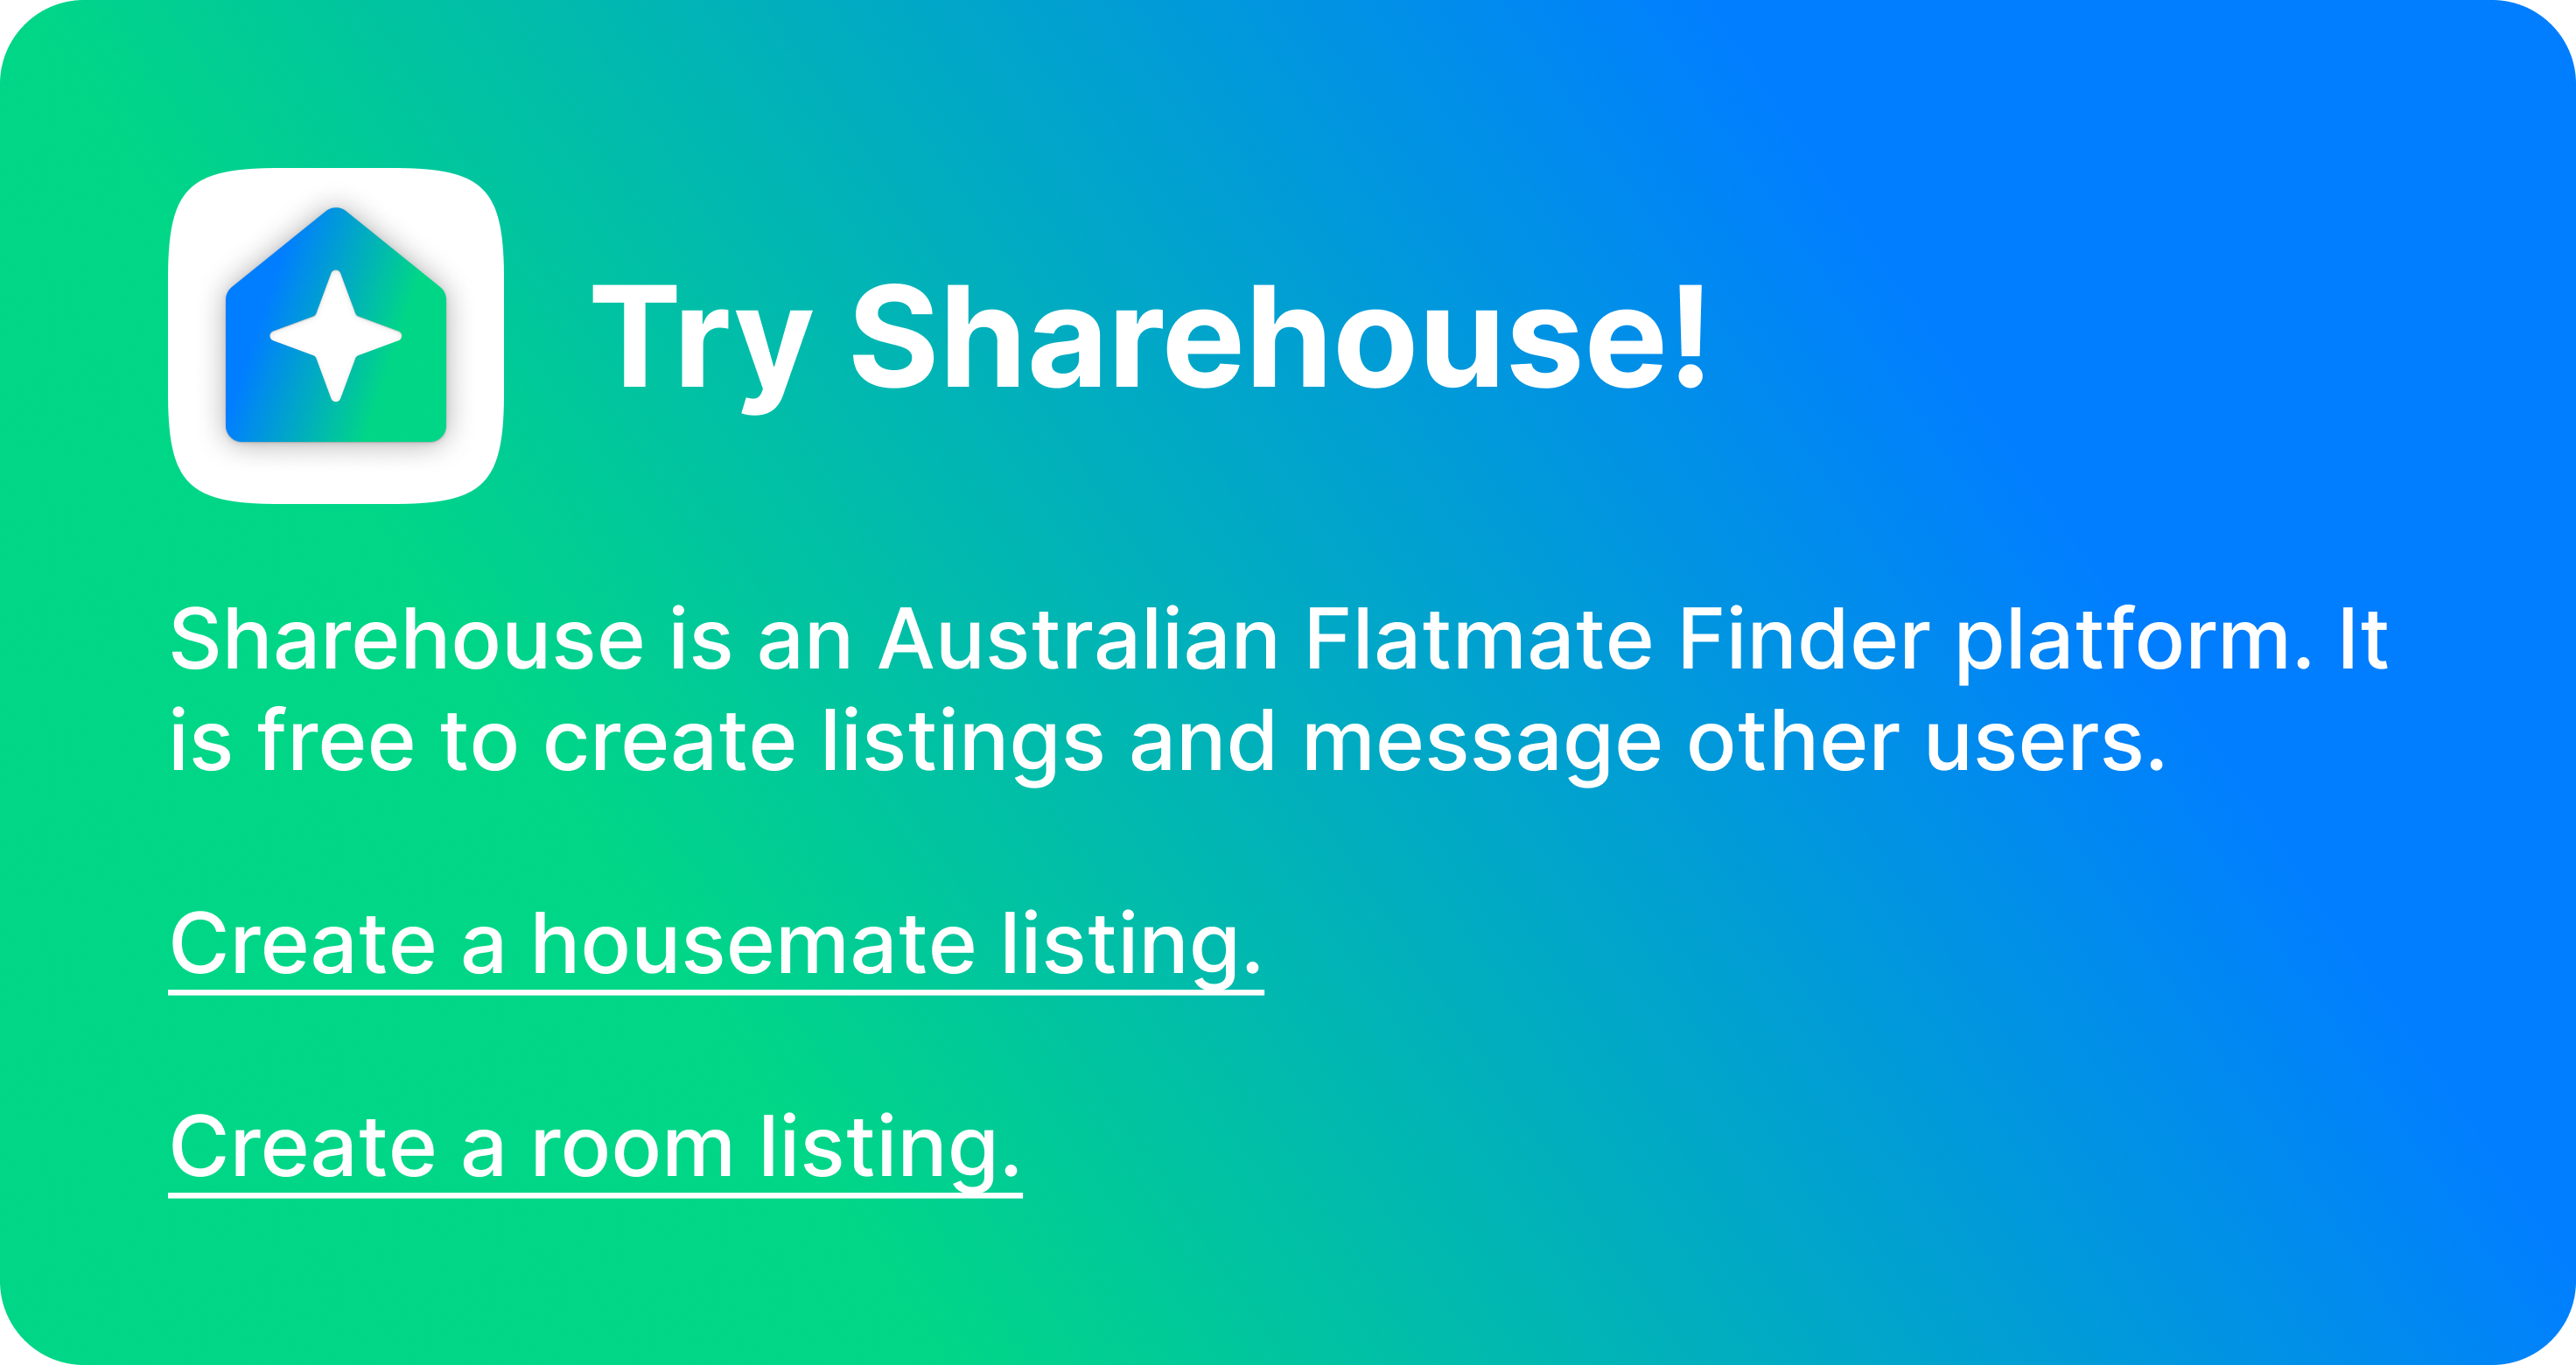 Try Sharehouse!